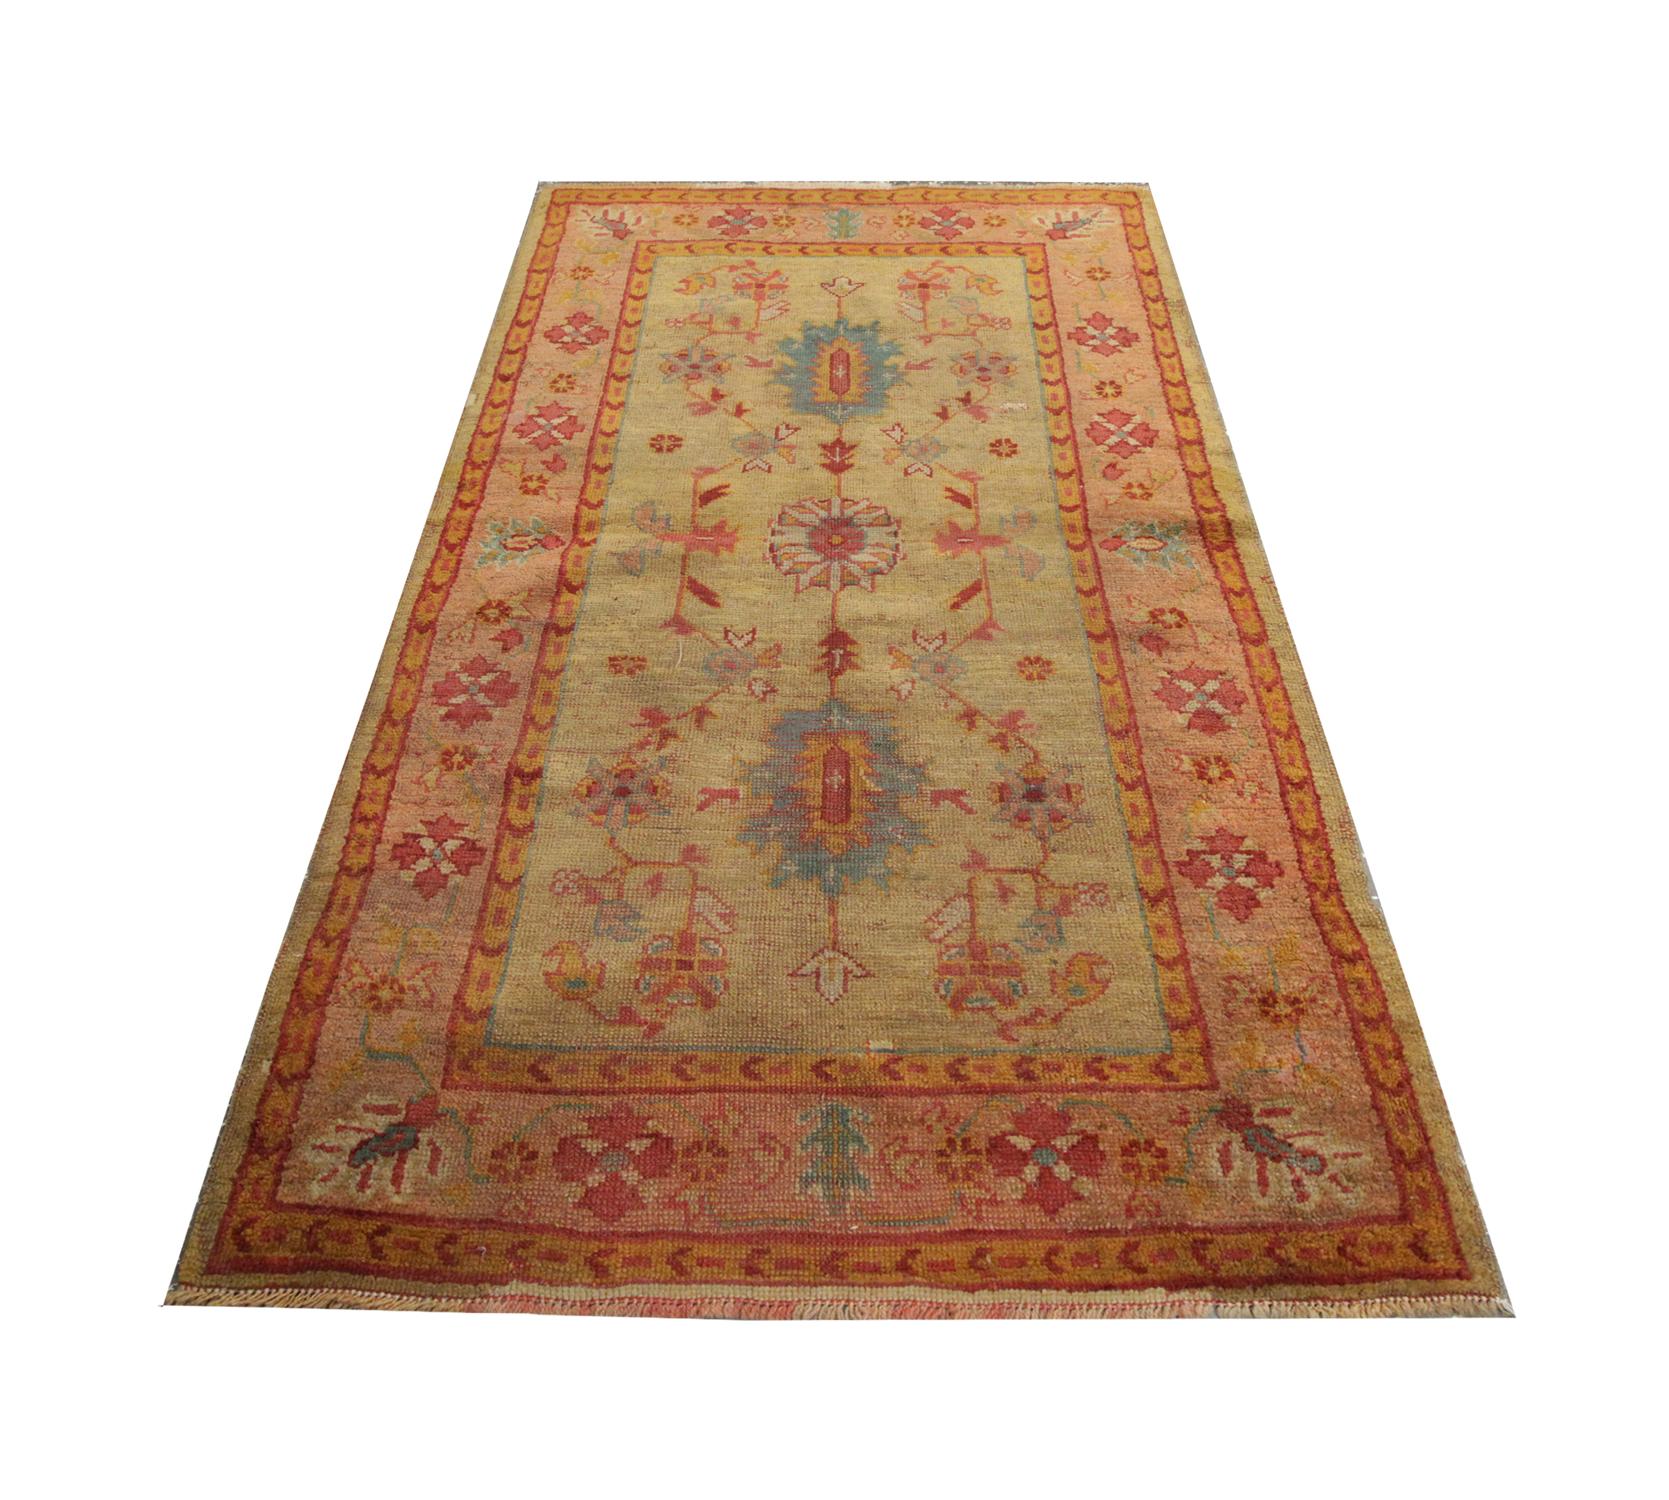 A handmade carpet Vibrant botanical design drenches this high-quality Turkish Oushak rug Antique rug, with a symmetrical floral motif design, handwoven in 1890 with hand-spun, vegetable-dyed wool and cotton, by some of the finest artisans. Perfect